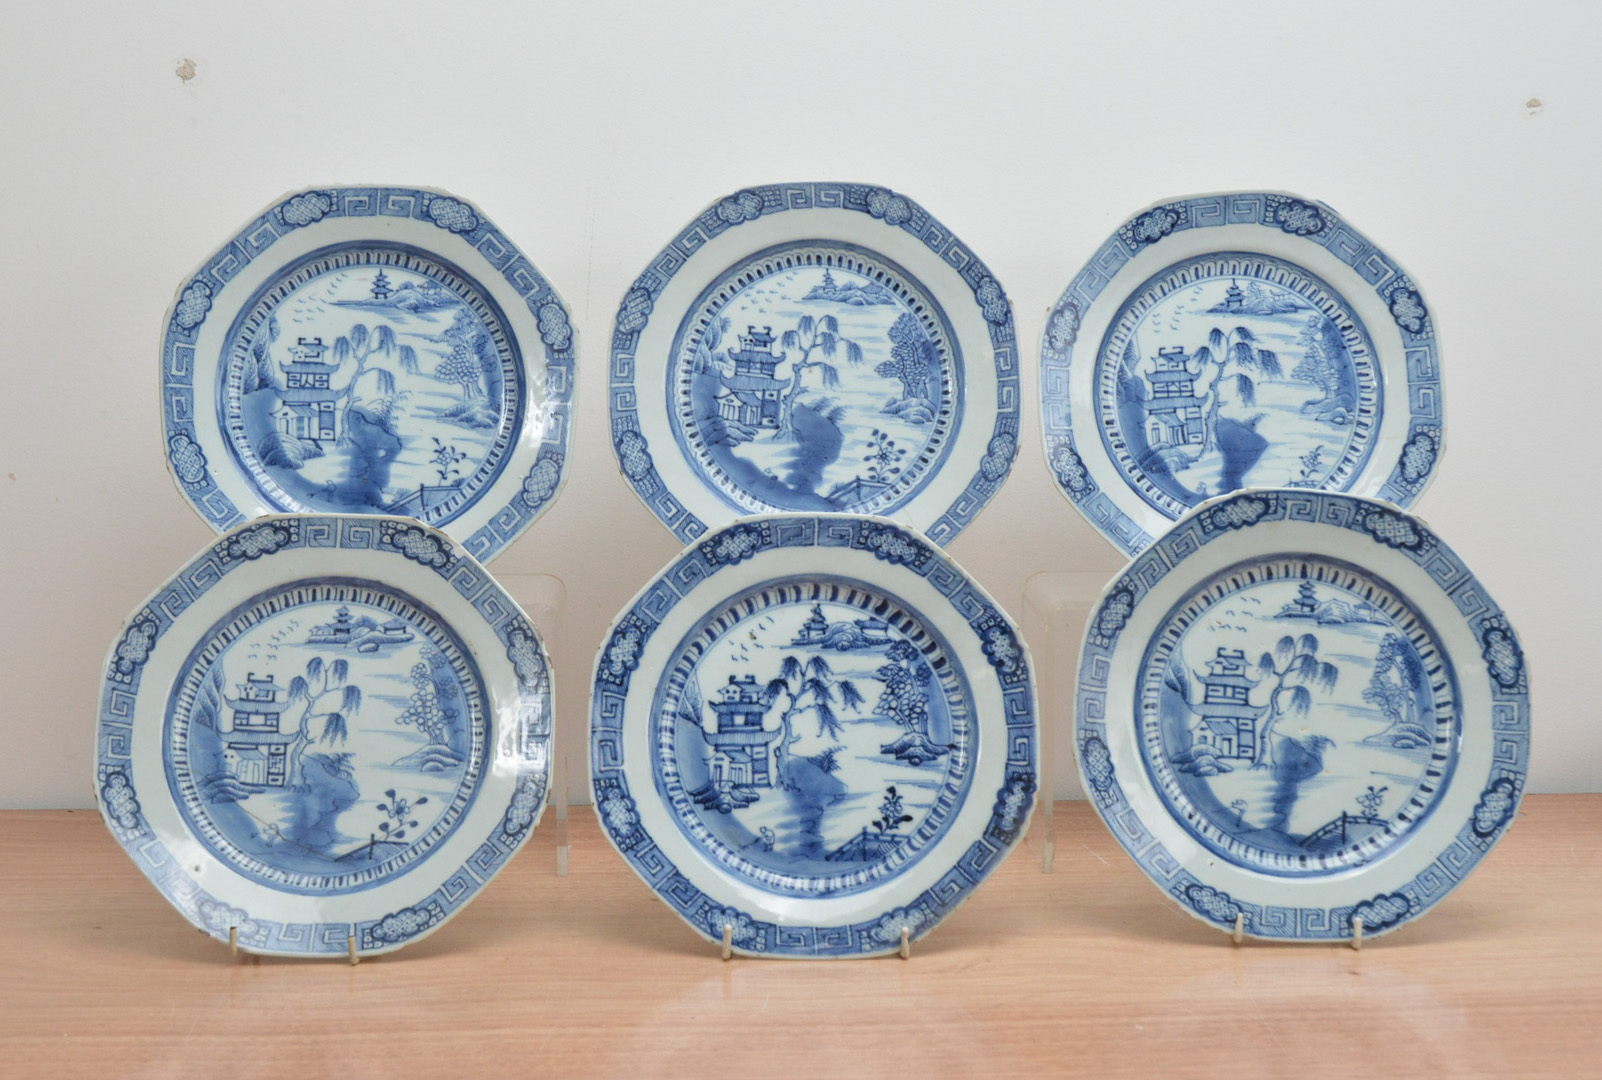 Six early 19th century Chinese porcelain octagonal blue and white plates, with a Willow pattern